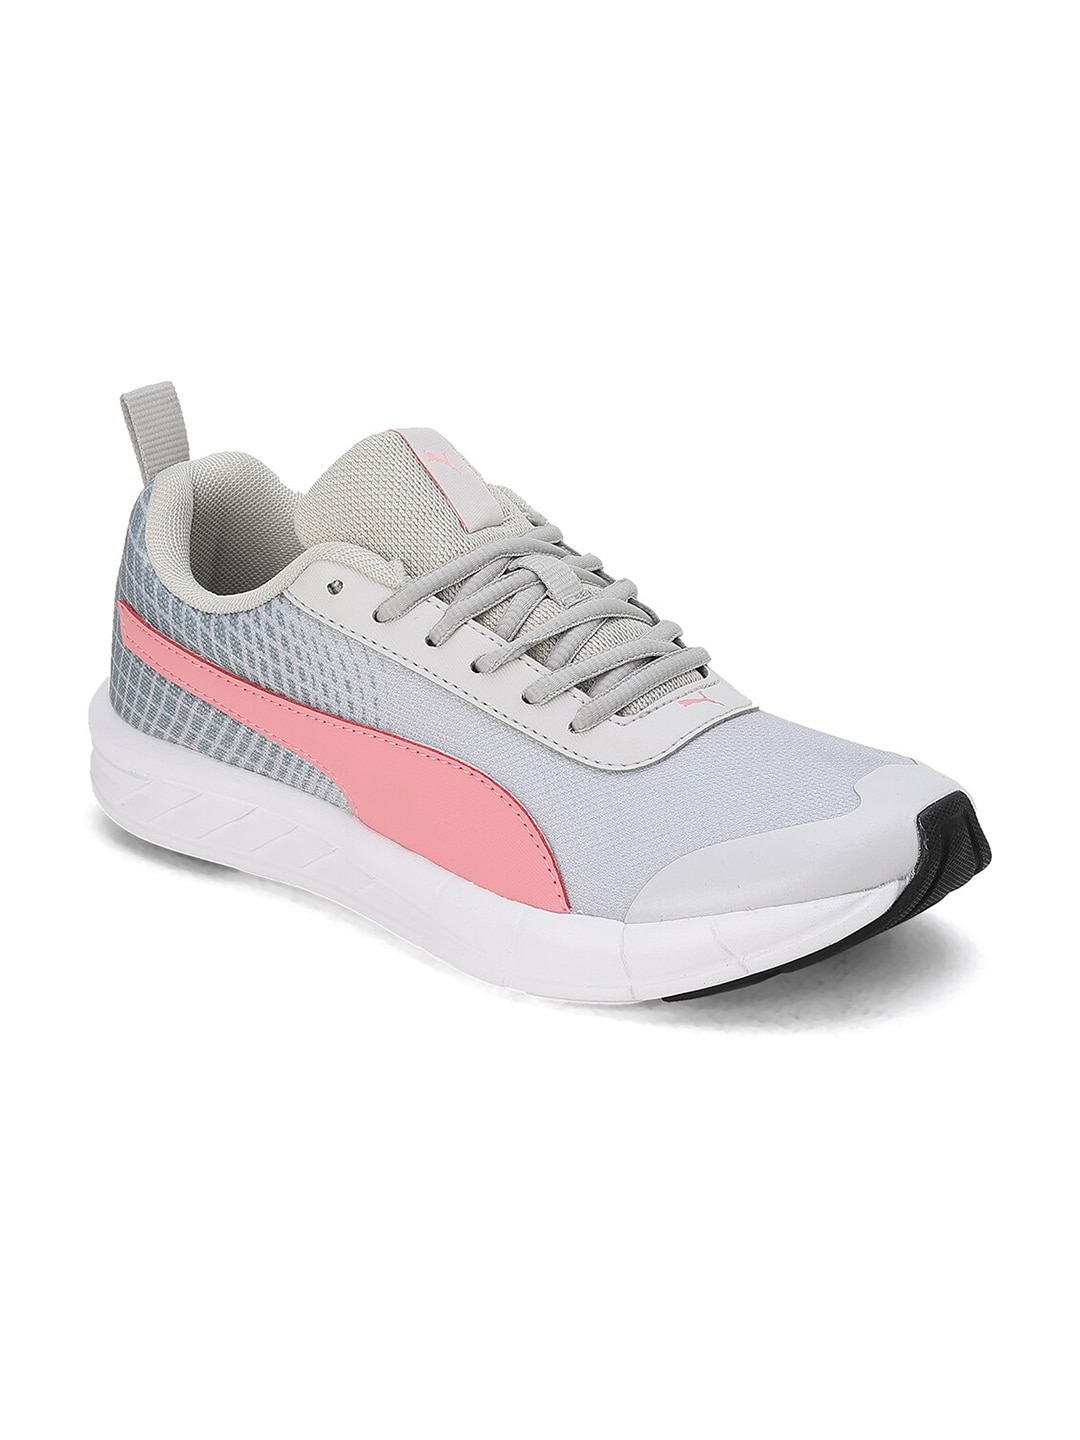 Puma Women Grey Supernal V3 Textile Running Shoes Price in India